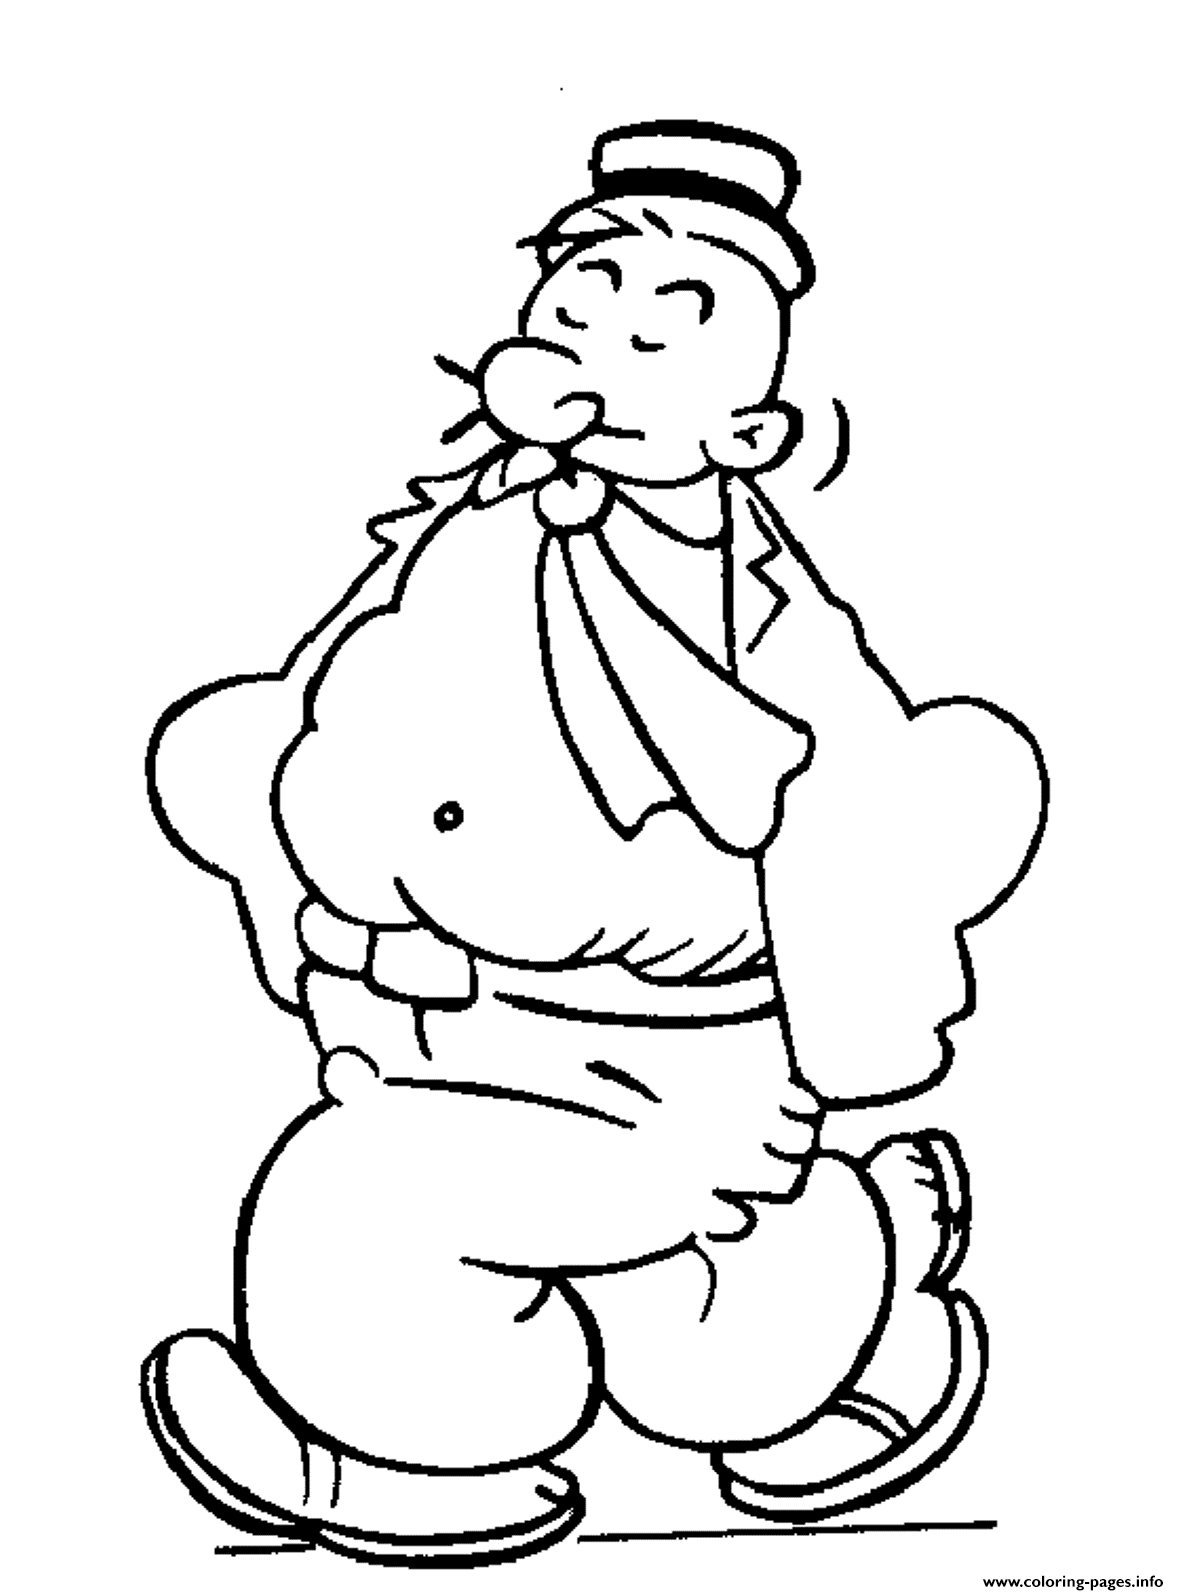 popeye-coloring-page-0019-q1